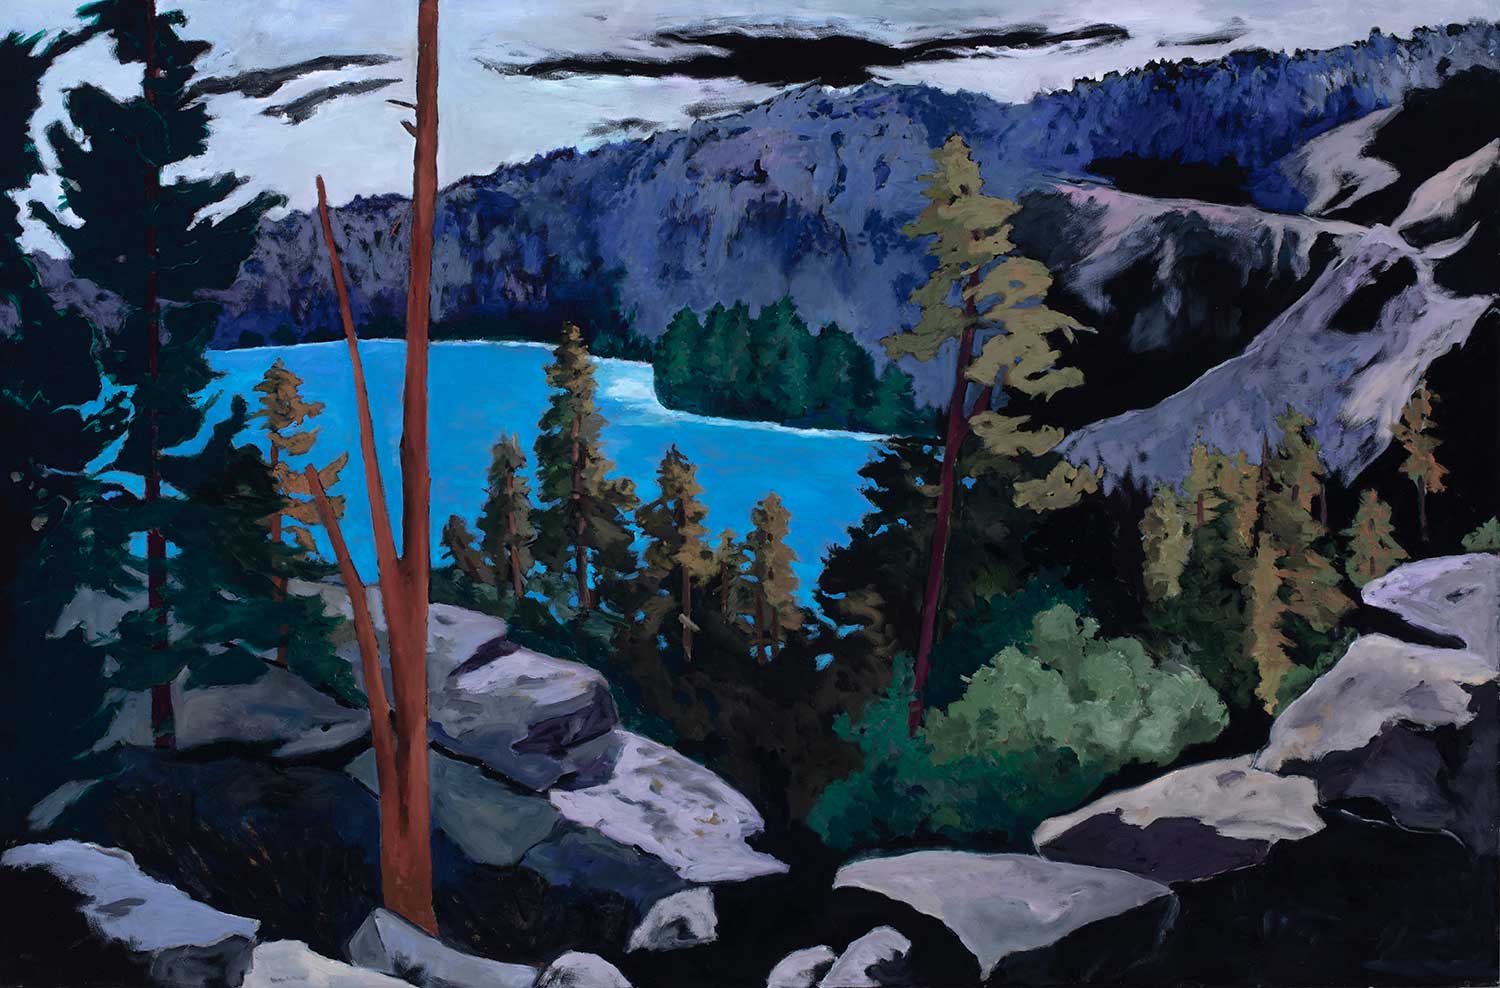 Lake Tahoe #1, 2021 by Mary Alice Copp